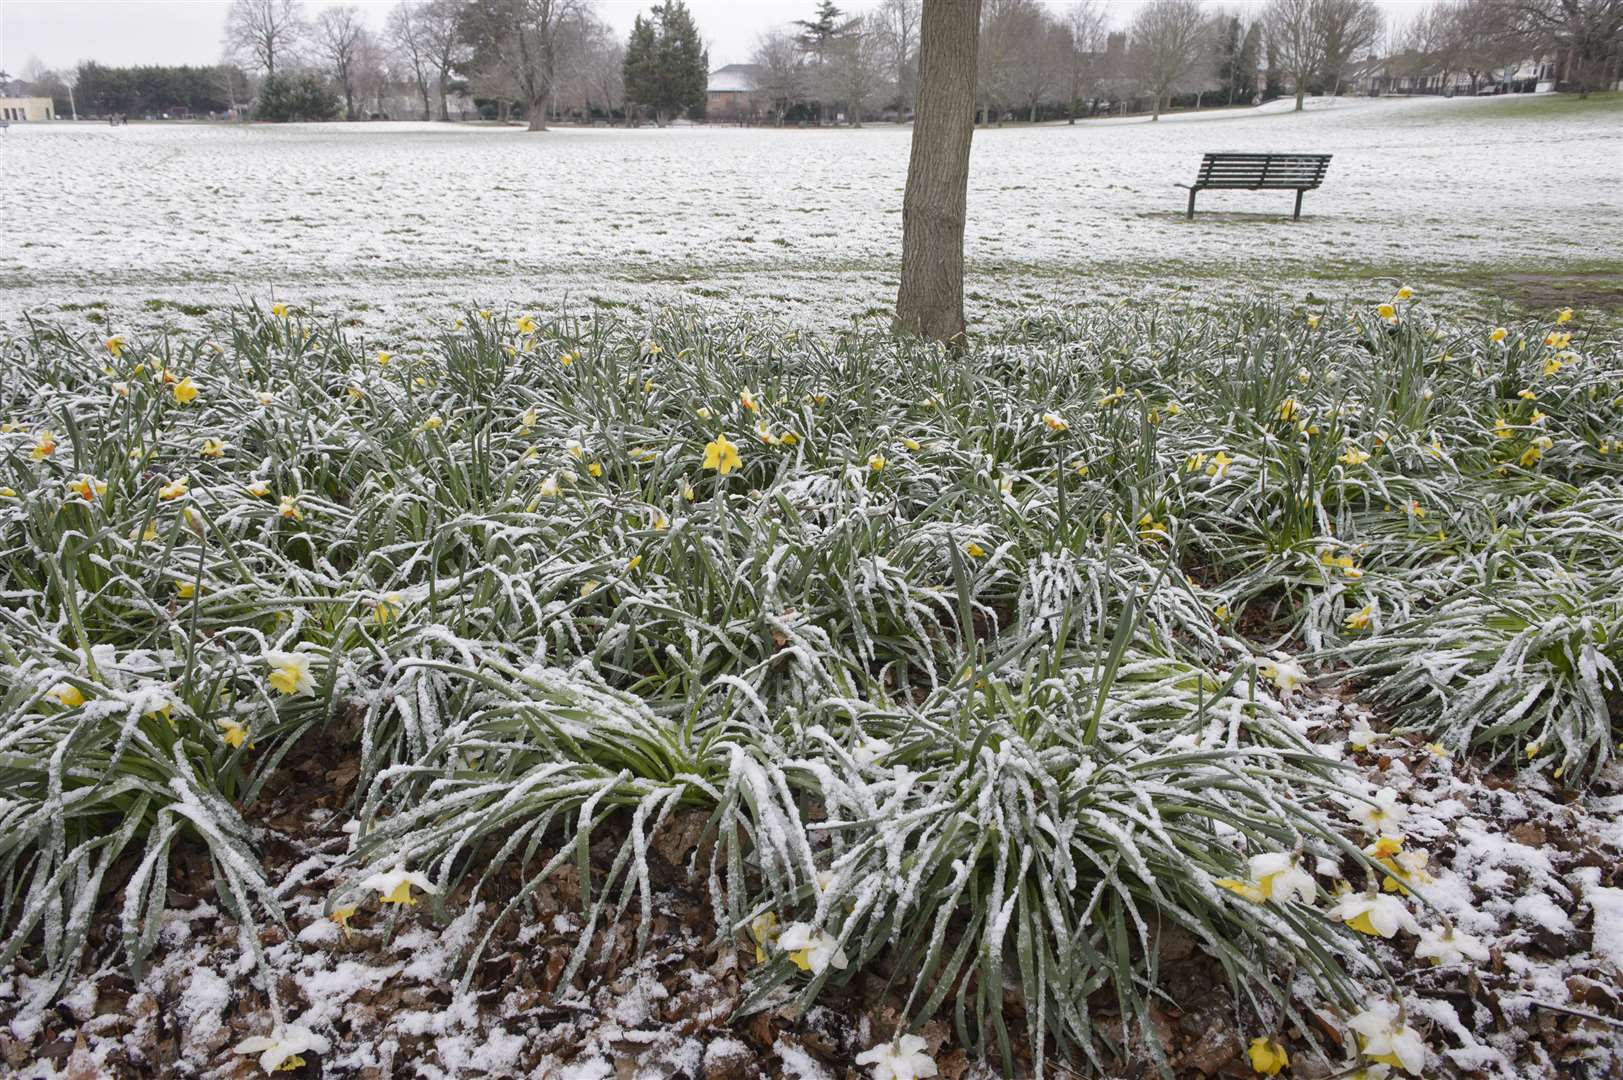 Experts say there will probably be a light dusting of snow over the next few days